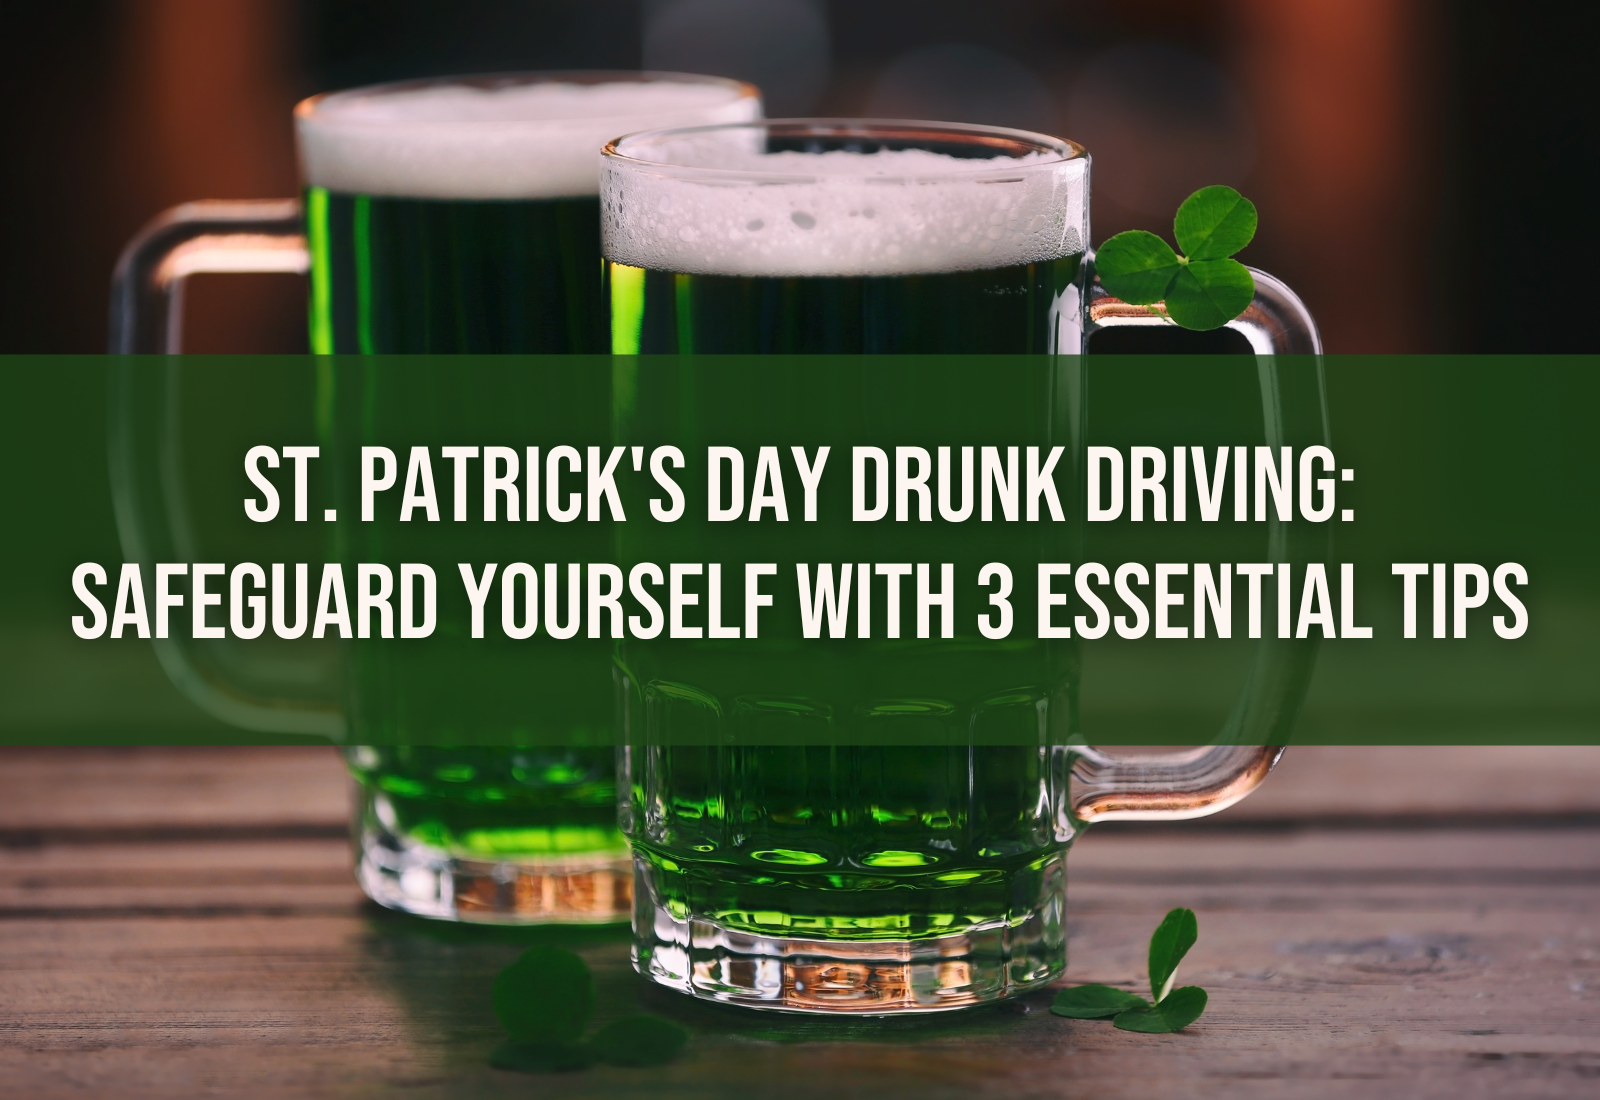 An image of two green beers sitting on a table in the foreground. The background is blurry. Text over the drinks say, "St. Patrick's Day Drunk Driving: Safeguard Yourself with 3 Essential Tips"